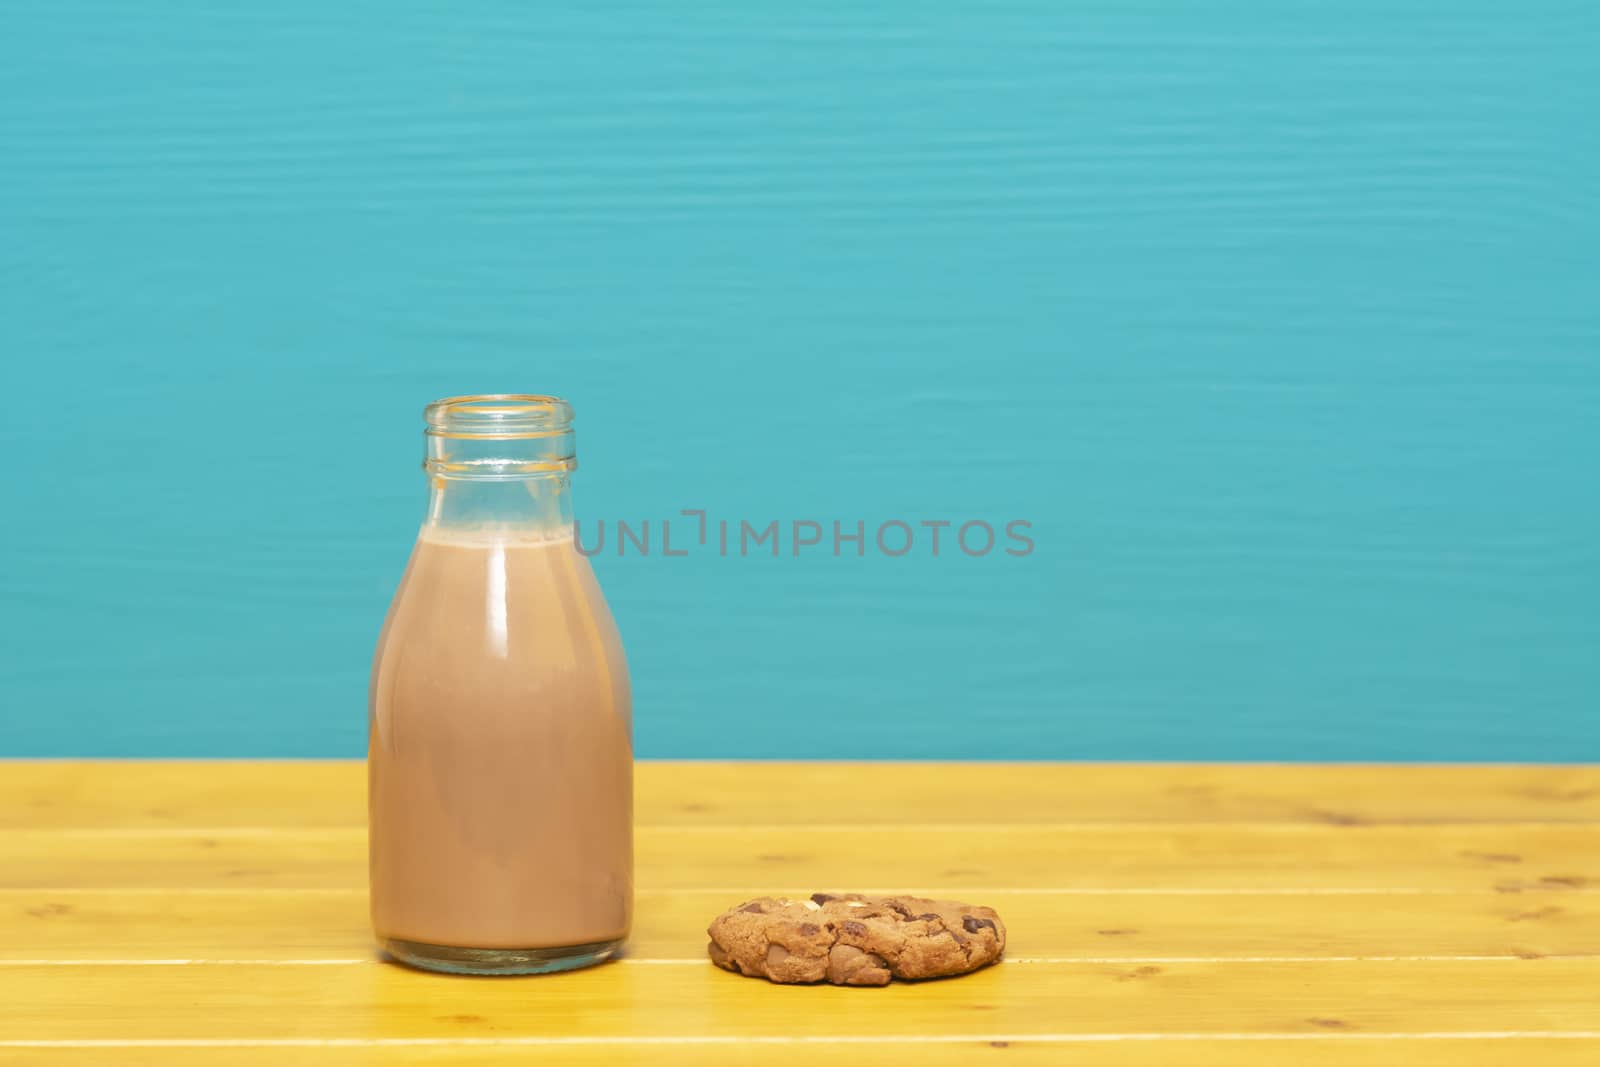 Chocolate milkshake in a retro one-third pint glass milk bottle and a chocolate chip cookie, on a wooden table against a bright teal painted background